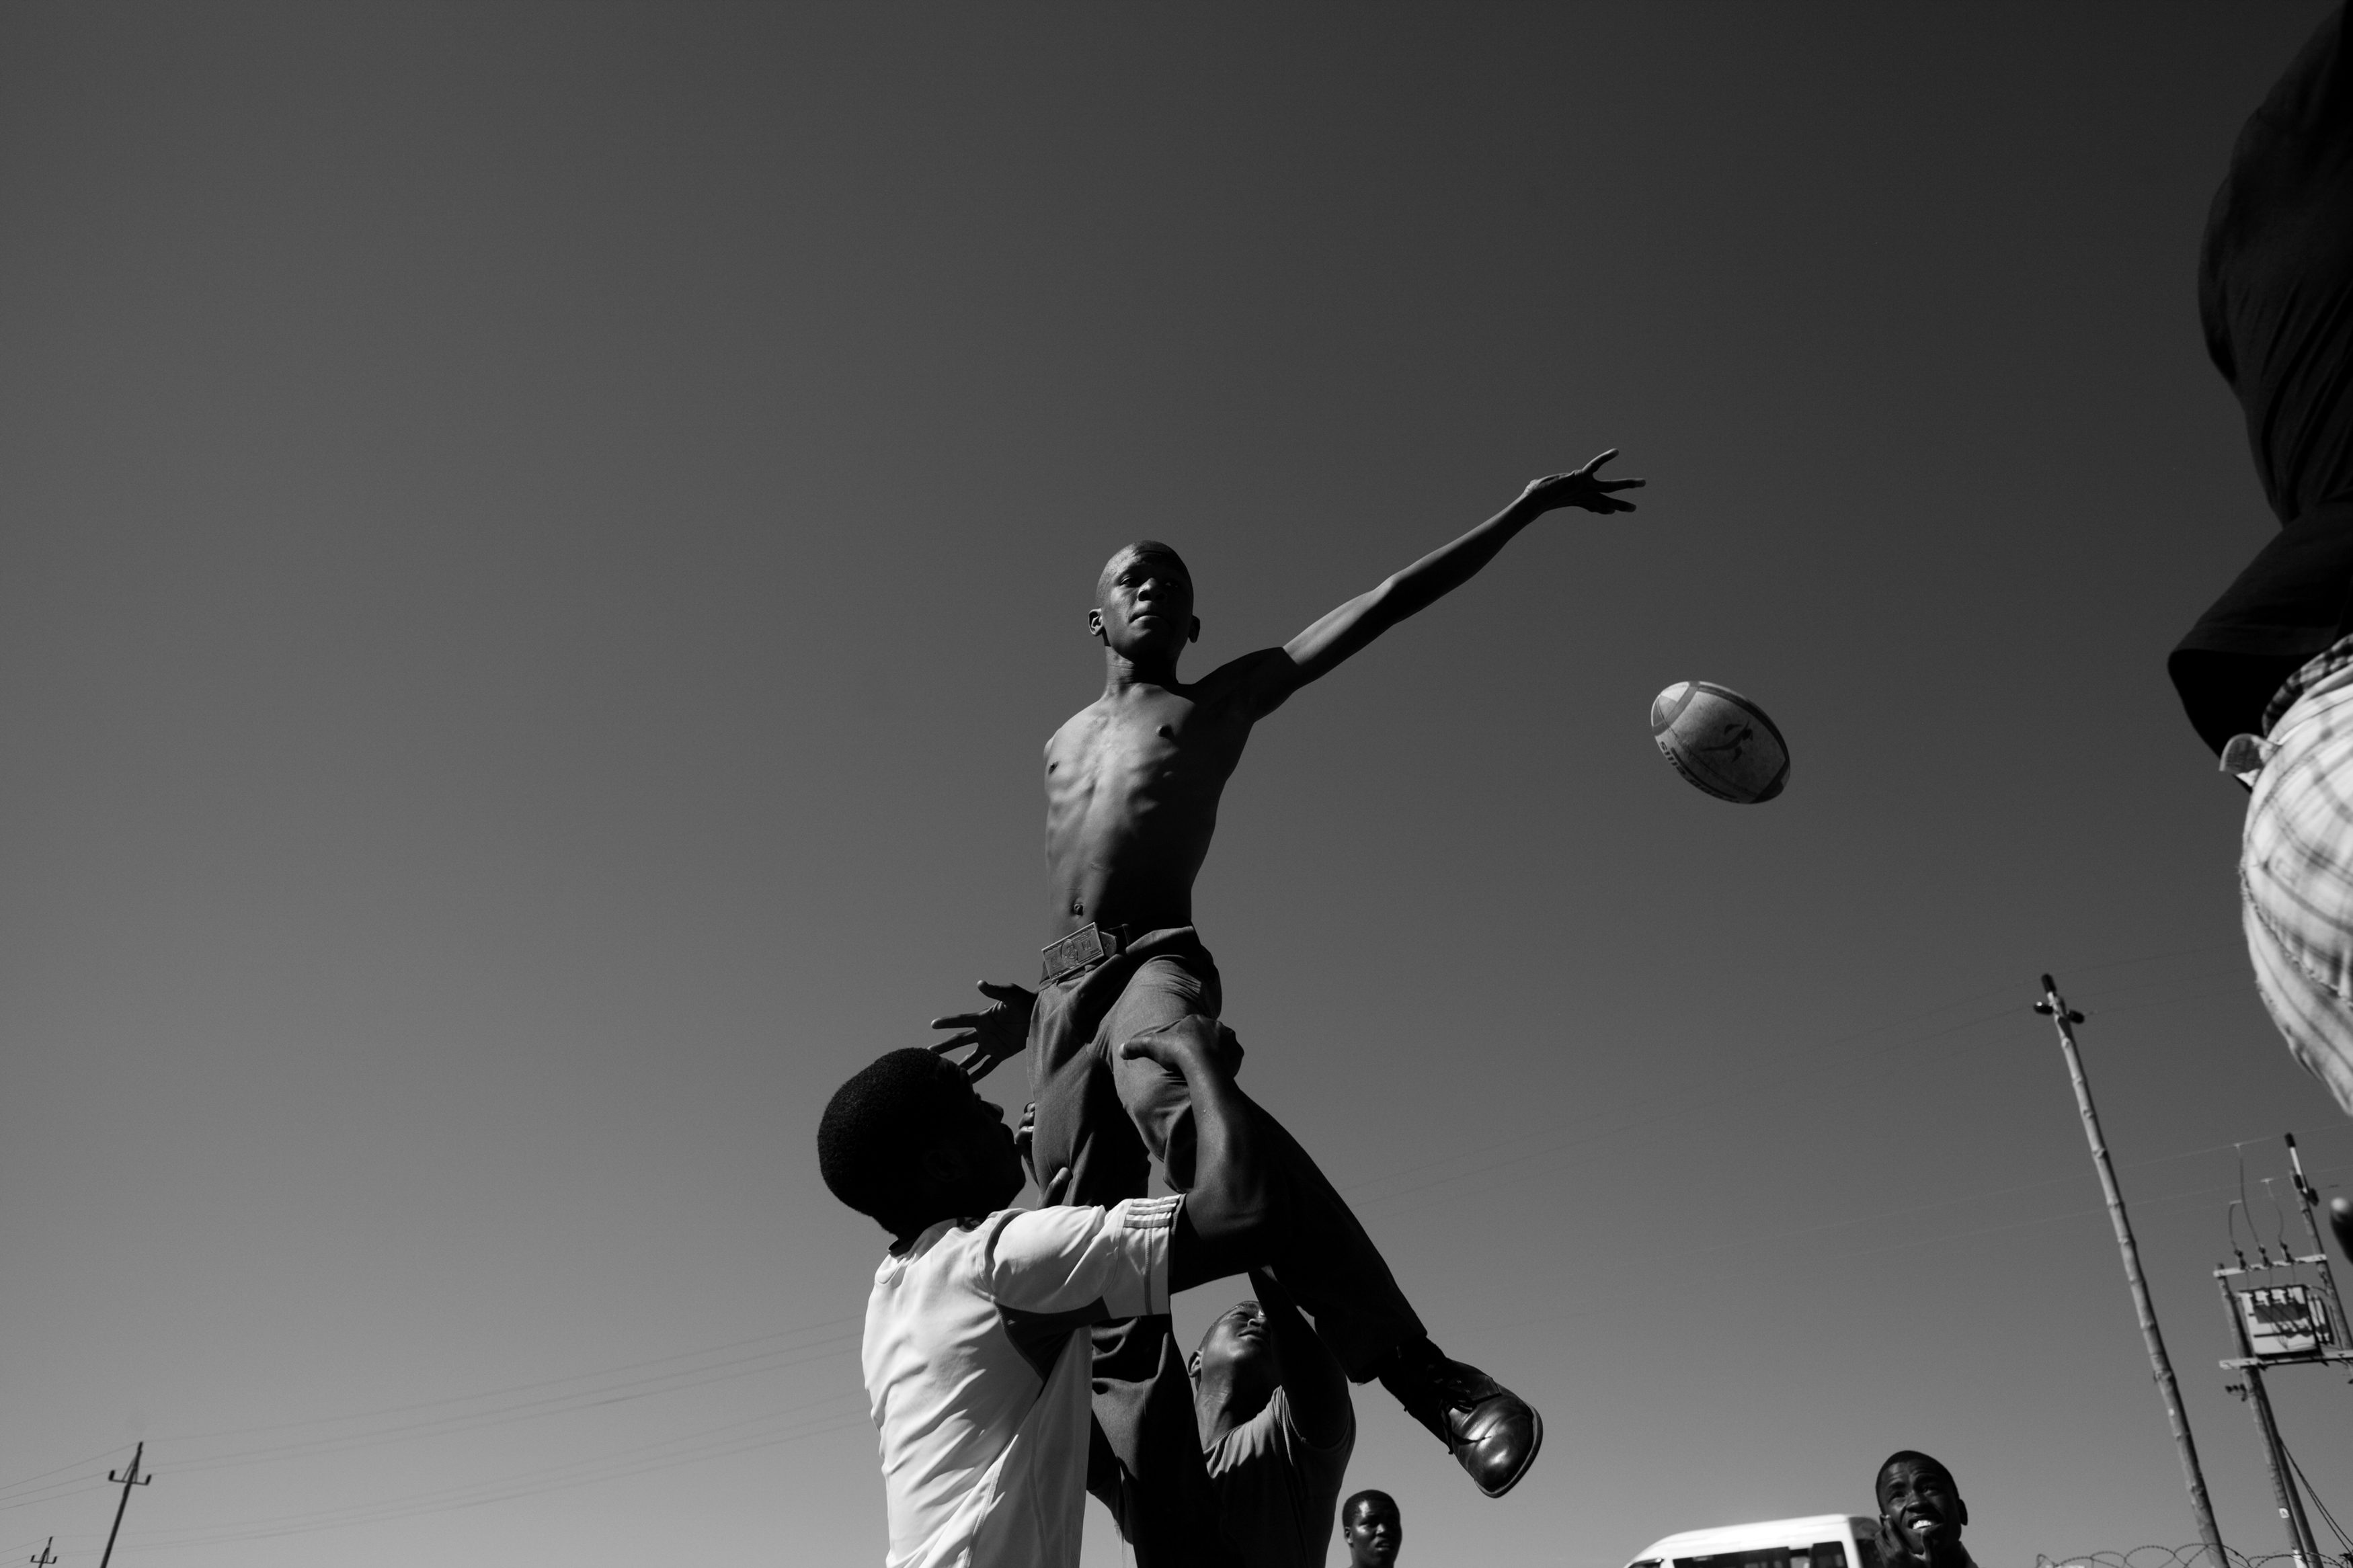 Ndumiso Gaga, 19, practices rugby with classmates at Iqhayiya Senior Secondary School, in Khayelitsha, Cape Town. “It’s hard to grow up here, because there are many things that are bad,” says Gaga. “If you don’t have some talent, you become a thief, a crook... I was staying in a very poor family, but every time I try to change my life it gets better… now my family is getting encouraged that I’m playing rugby. I’m going to build a house for my family if I become a star. It’s hard, because many people want this opportunity. I have to train hard to be a star.”